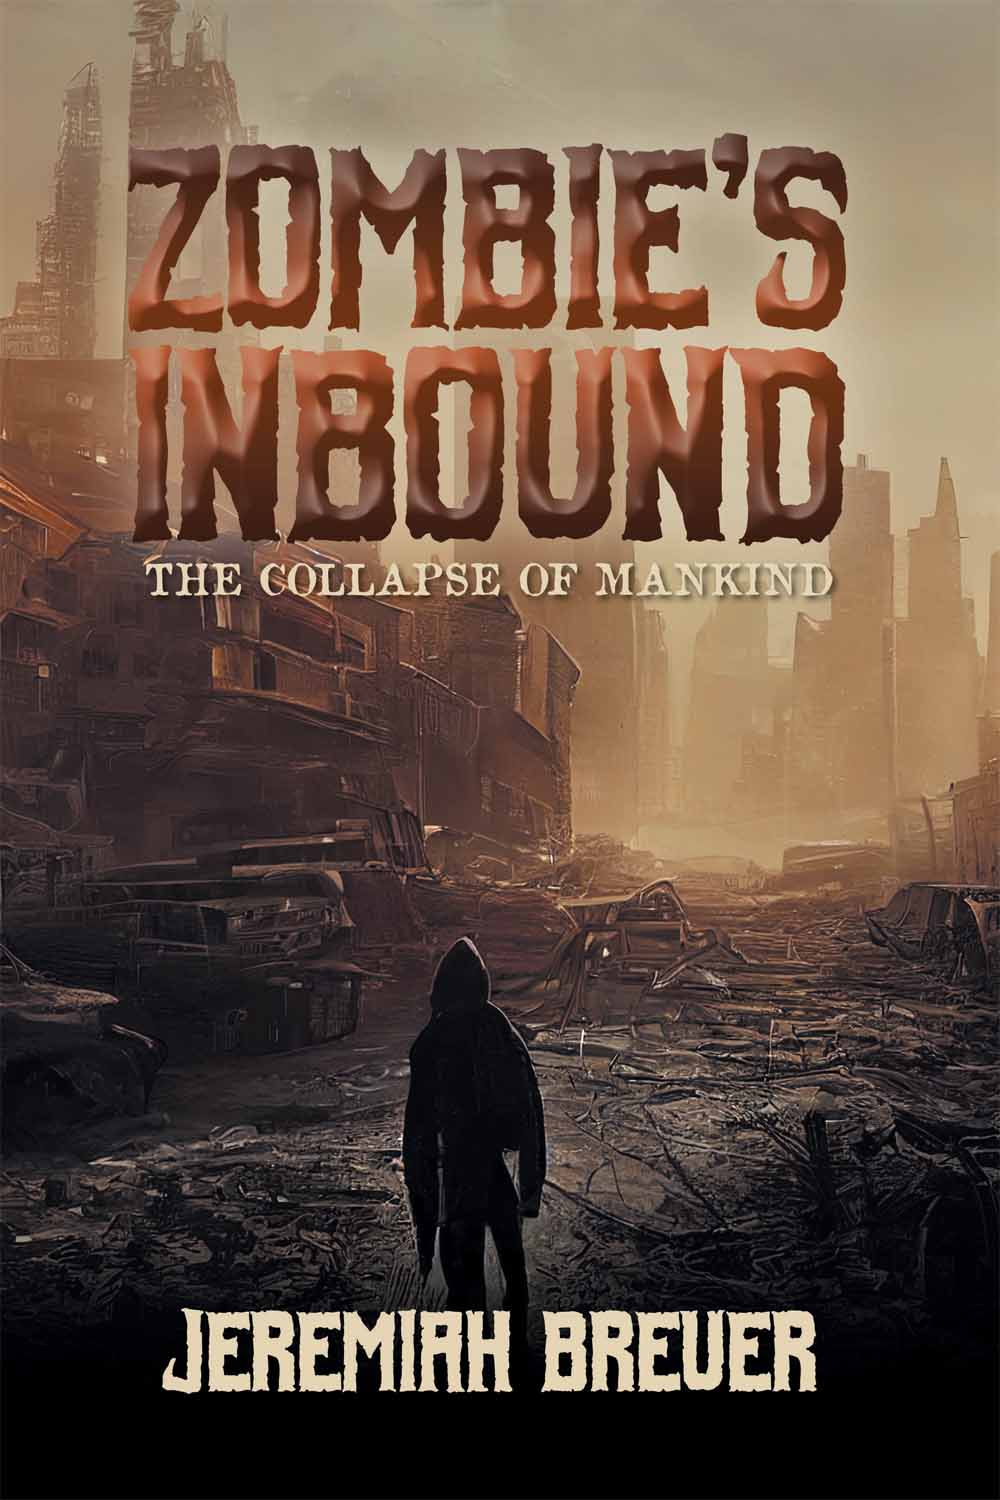 Zombie’s Inbound: THE COLLAPSE OF MANKIND by Jeremiah Breuer